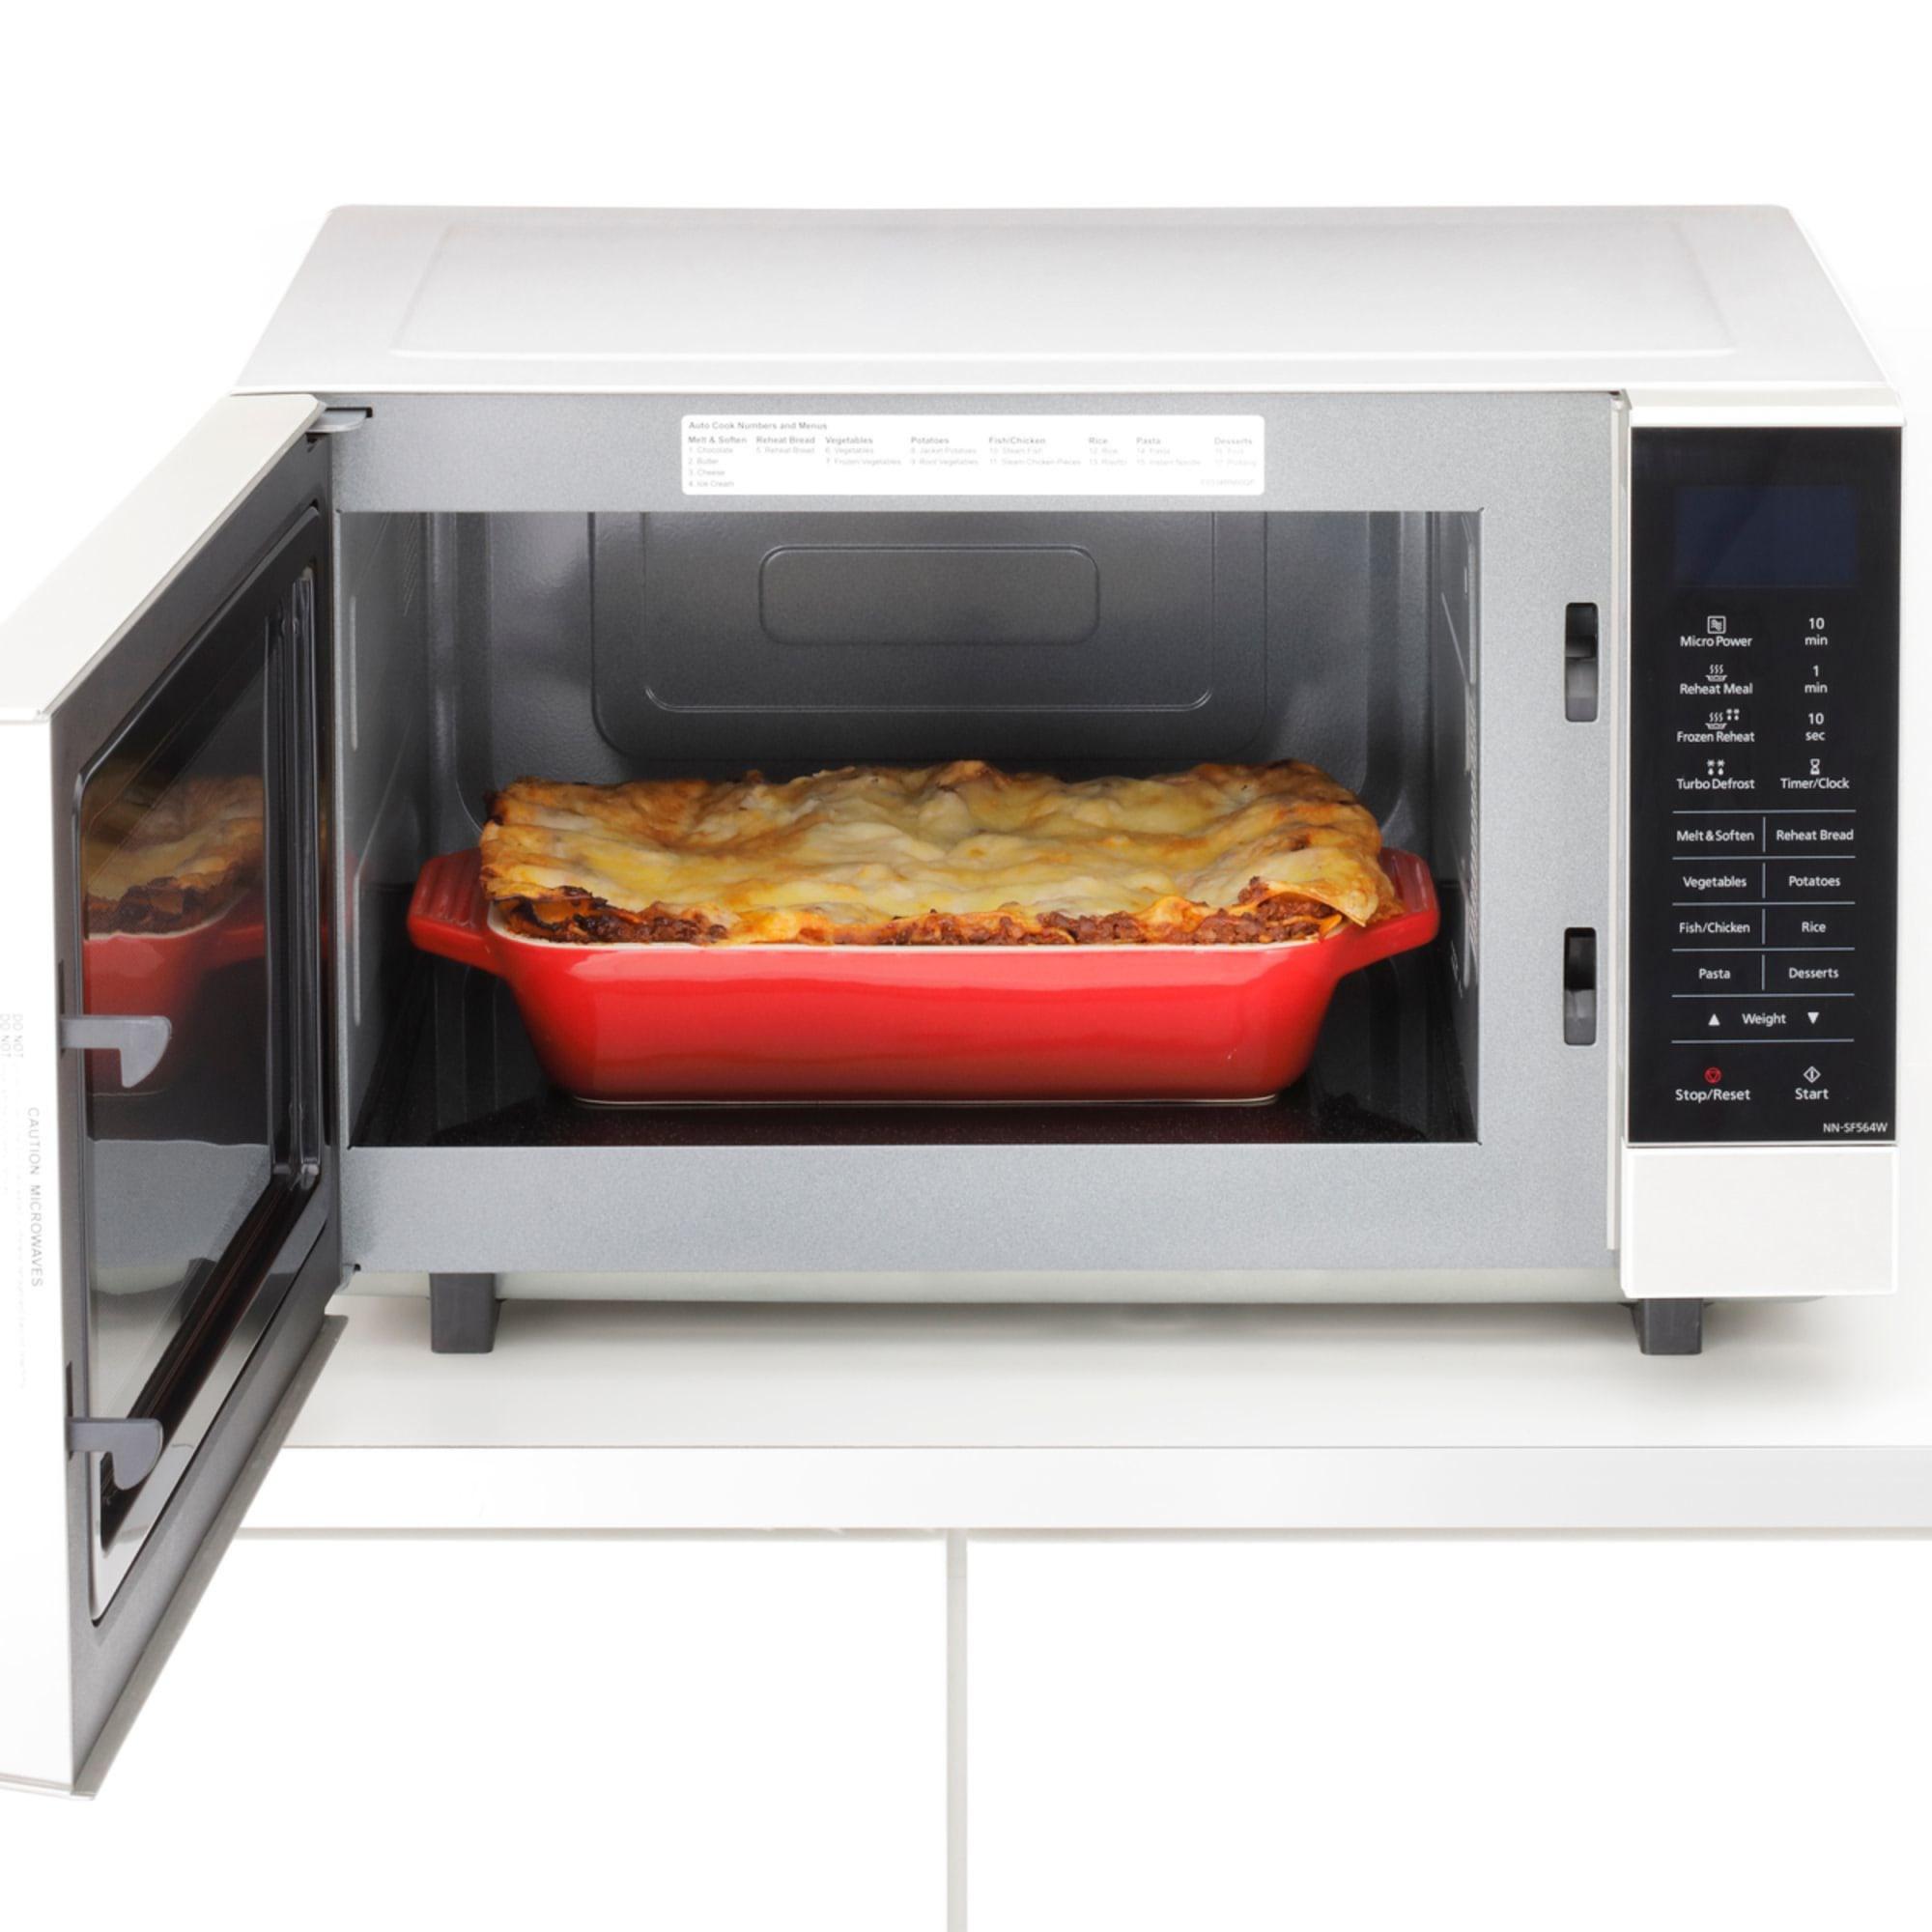 Panasonic Flatbed Microwave Oven 27L White Image 7